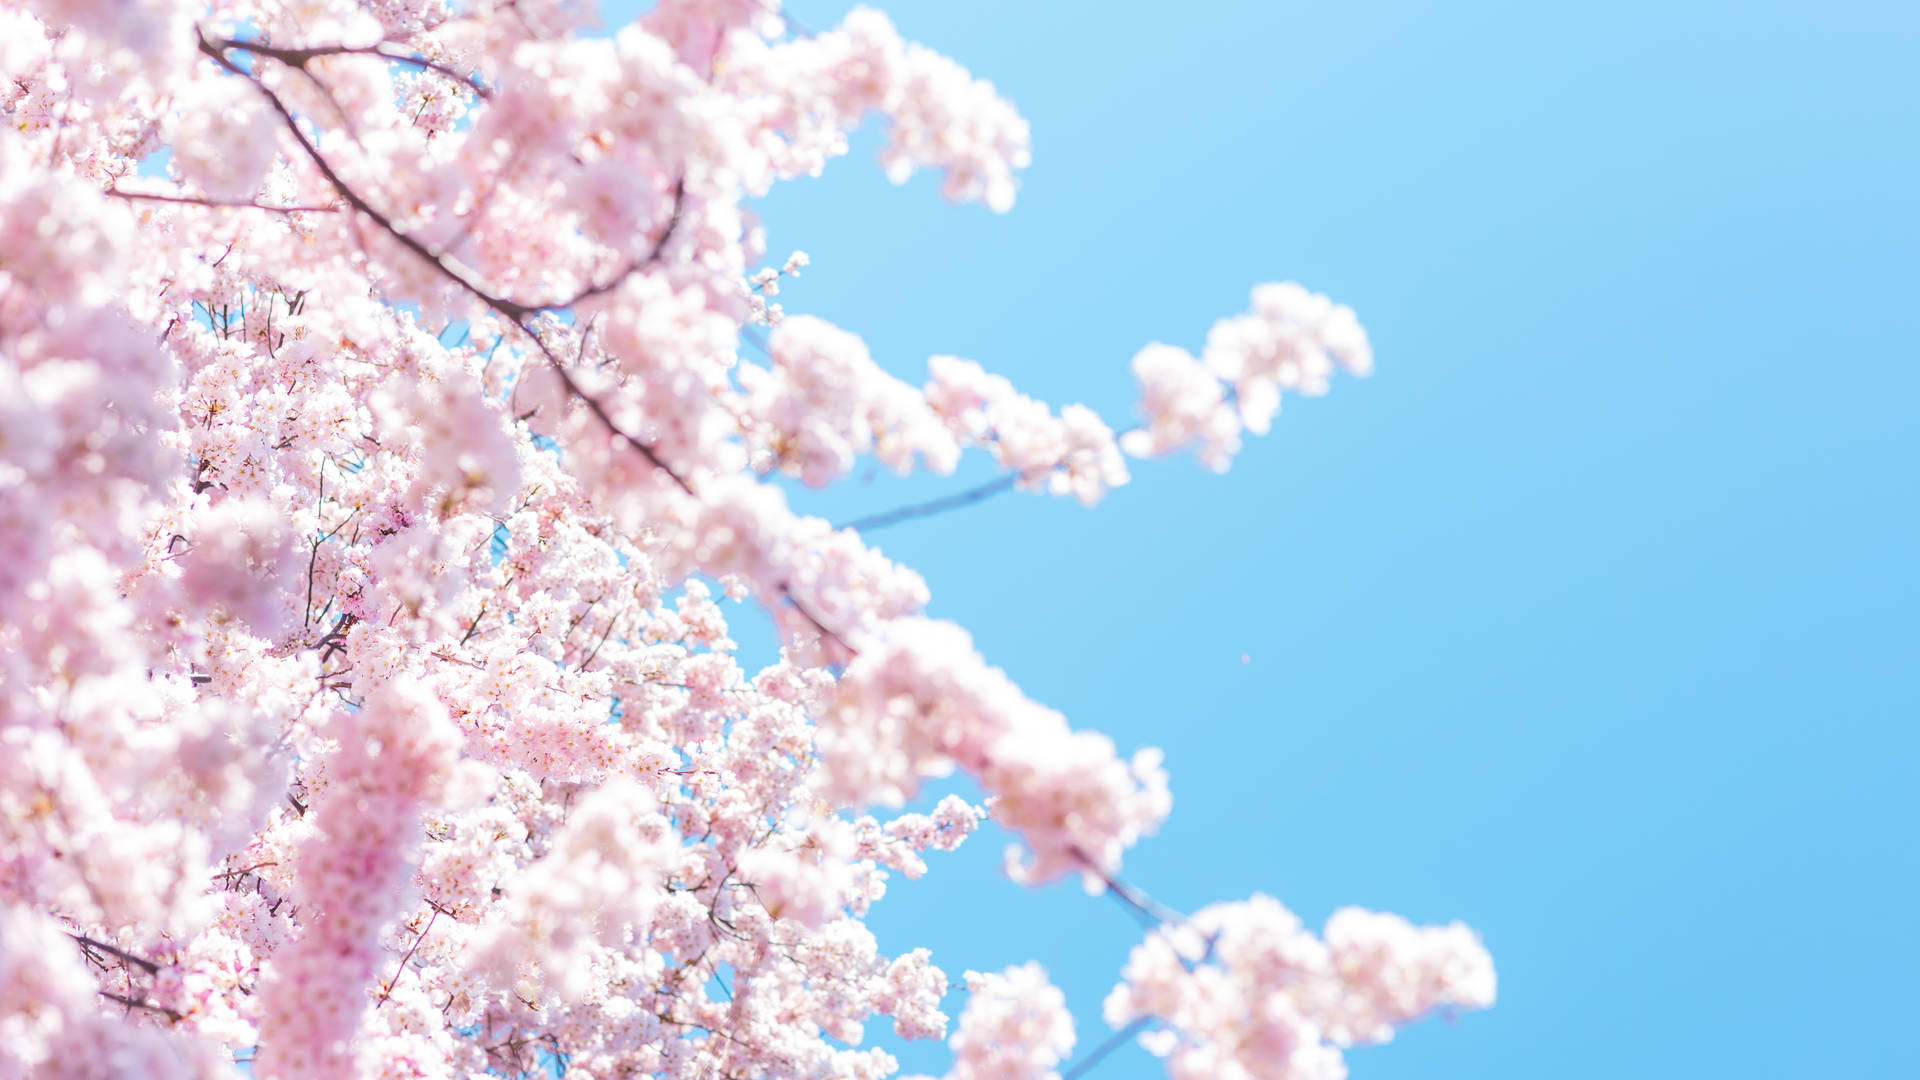 7360X4140 Cherry Blossom Wallpaper and Background